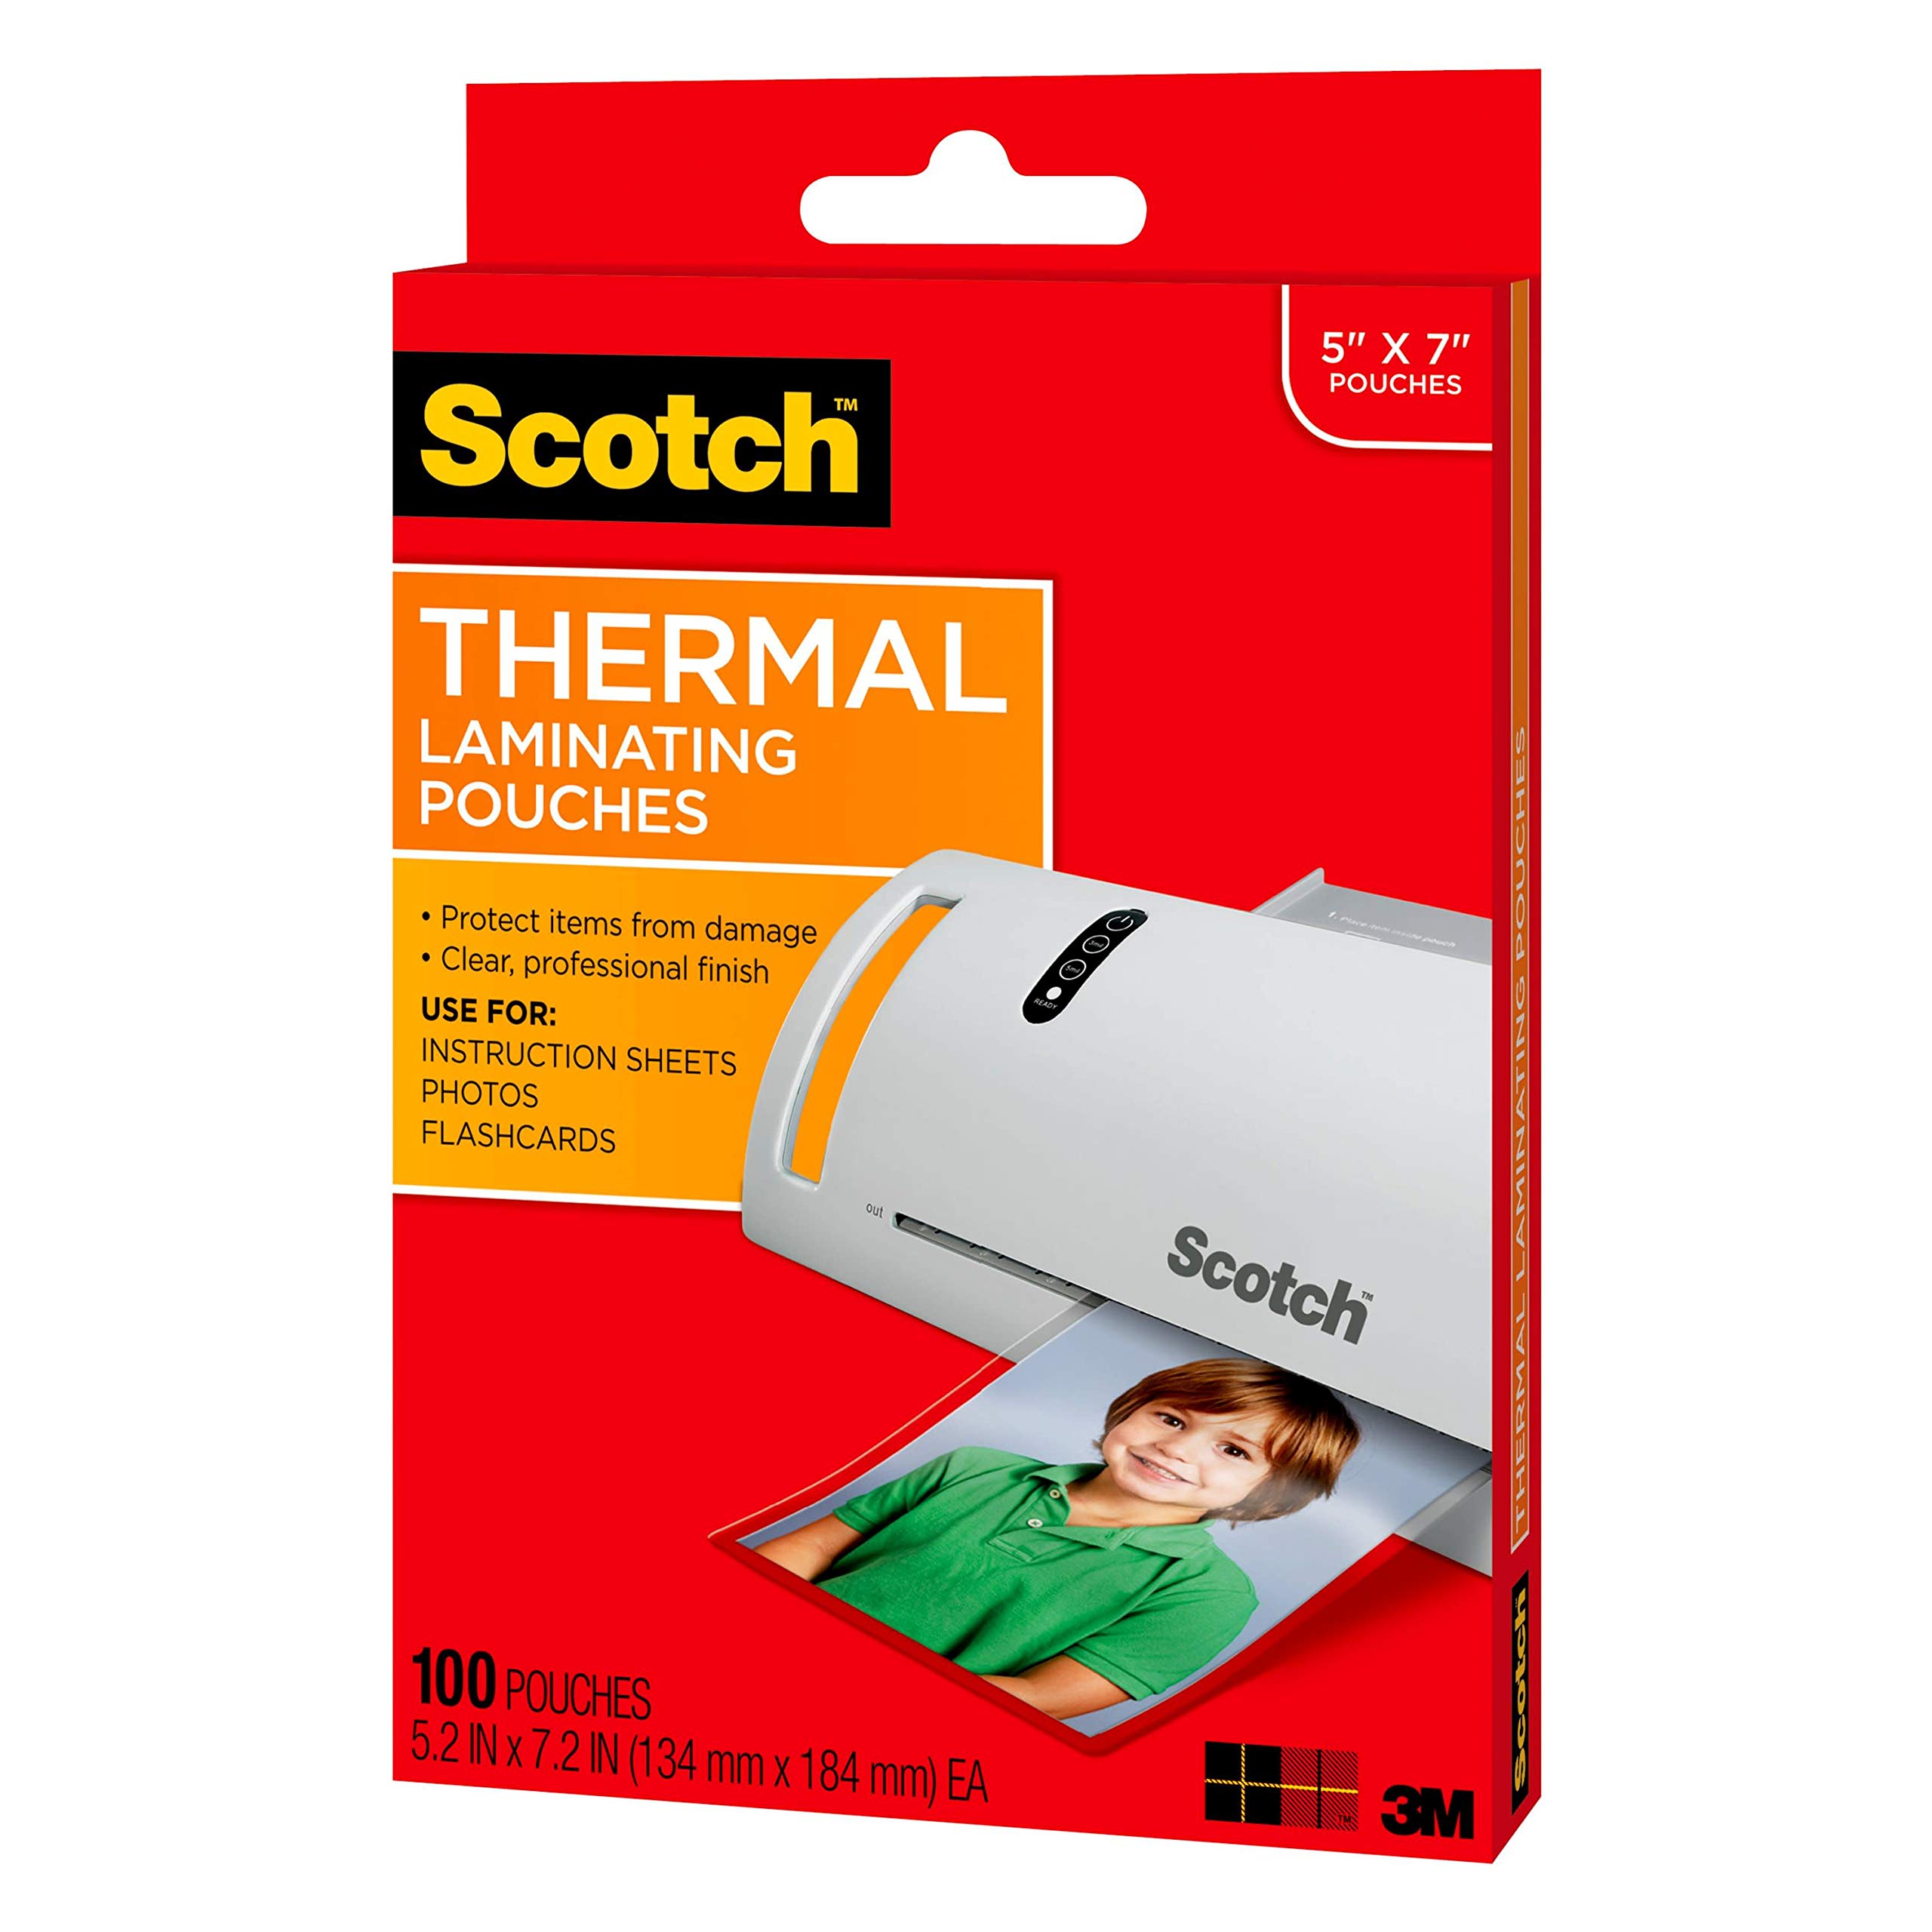 Scotch Thermal Laminating Pouches Premium Quality, 5 Mil Thick for Extra Protection, 100 Pack Photo Size Laminating Sheets, Our Most Durable Lamination Pouch, 5 x7 inches, Clear (TP5903-100)